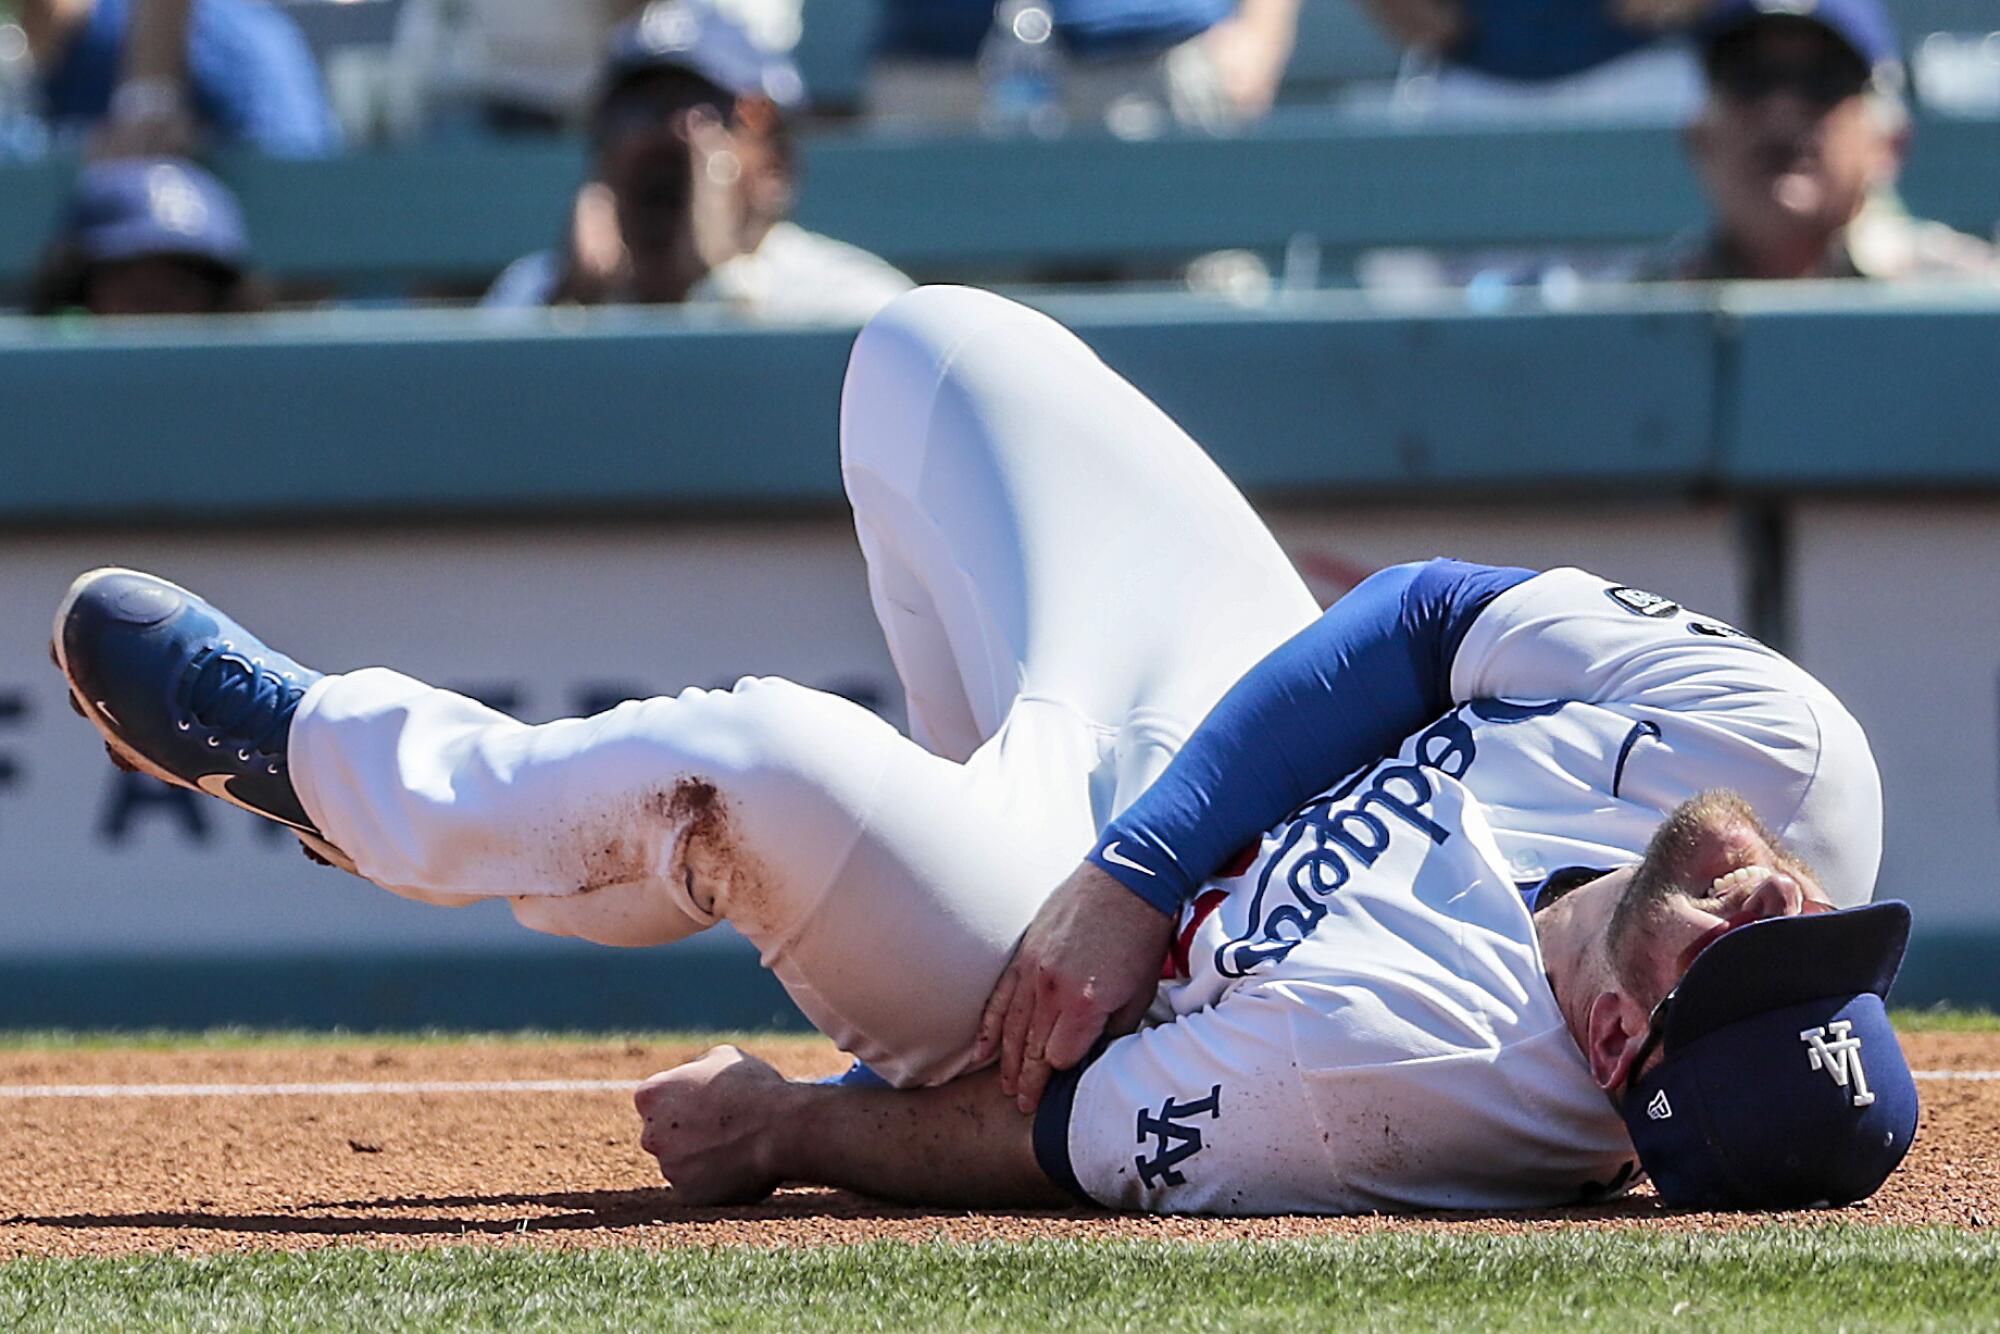 Dodgers first baseman Max Muncy writhes in pain while on the ground holding his elbow